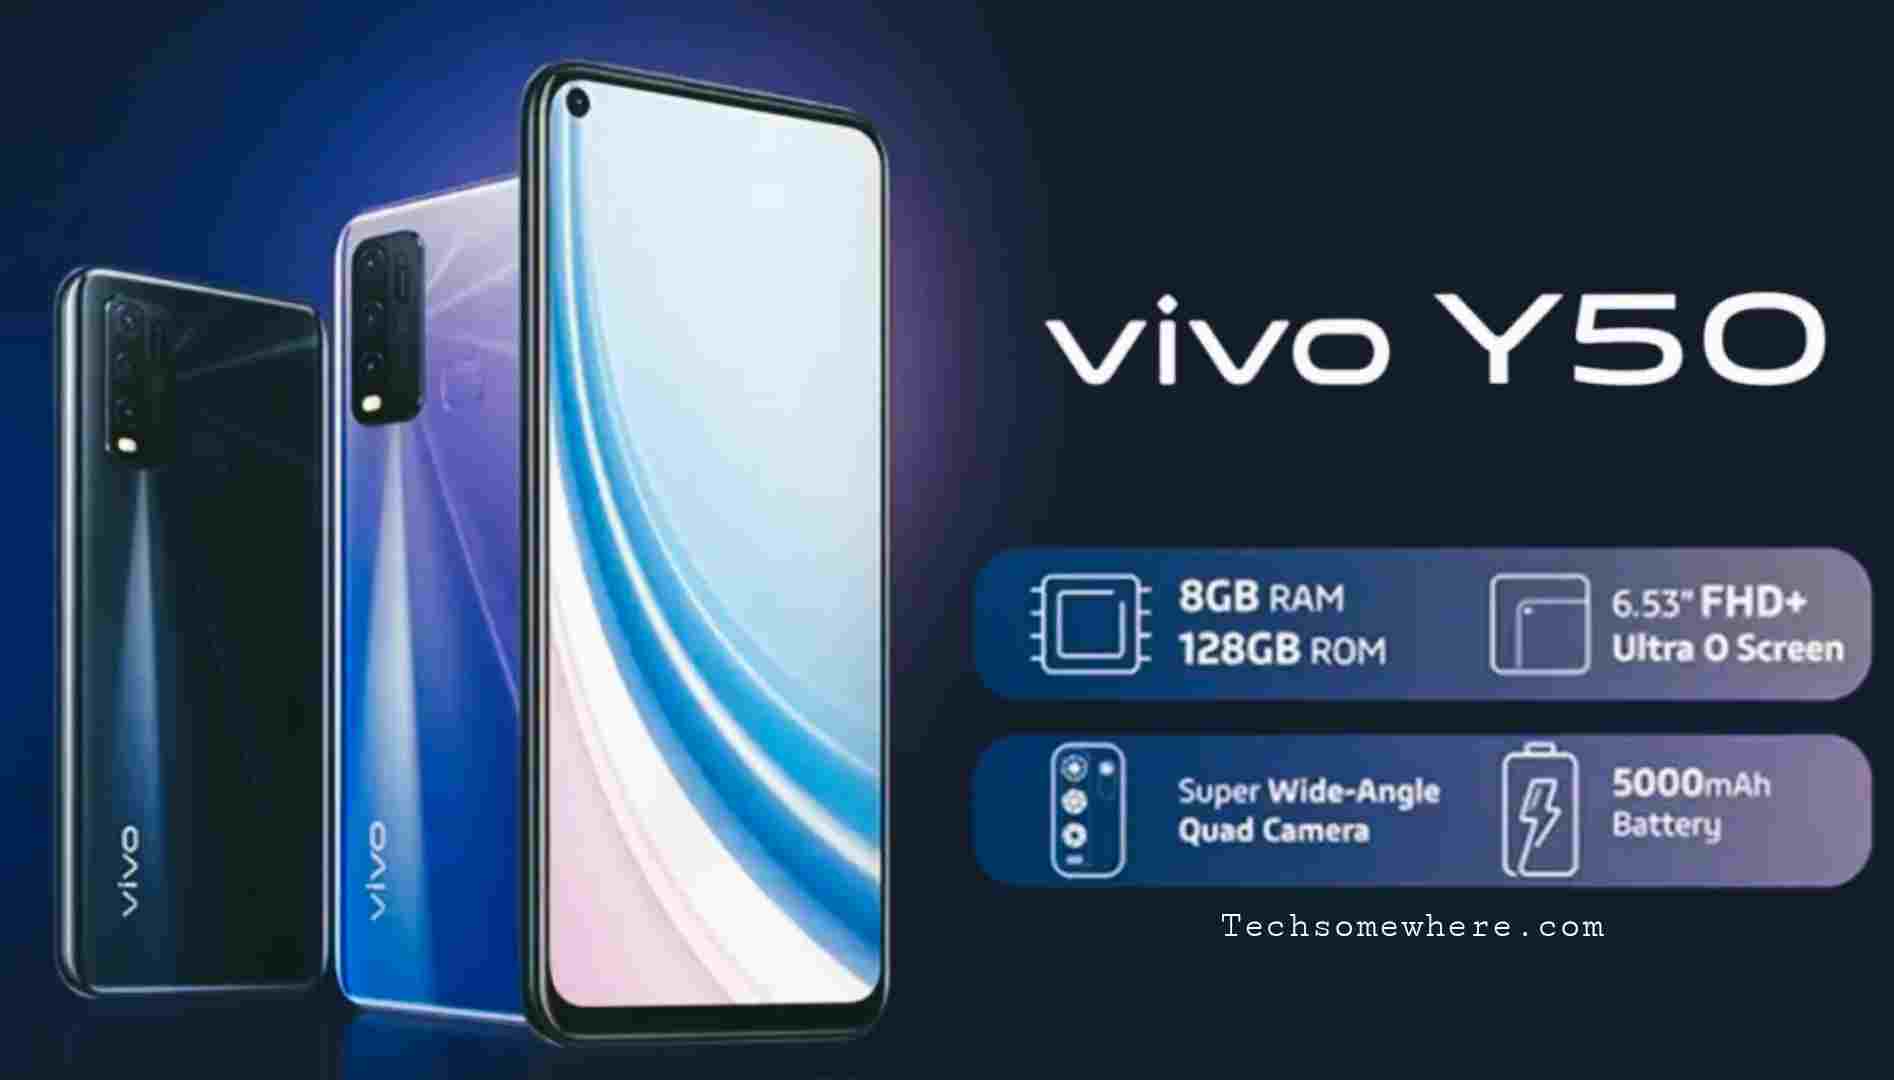 Vivo Y50 - Exotic Smartphone Interesting Features, Price & Release Date!